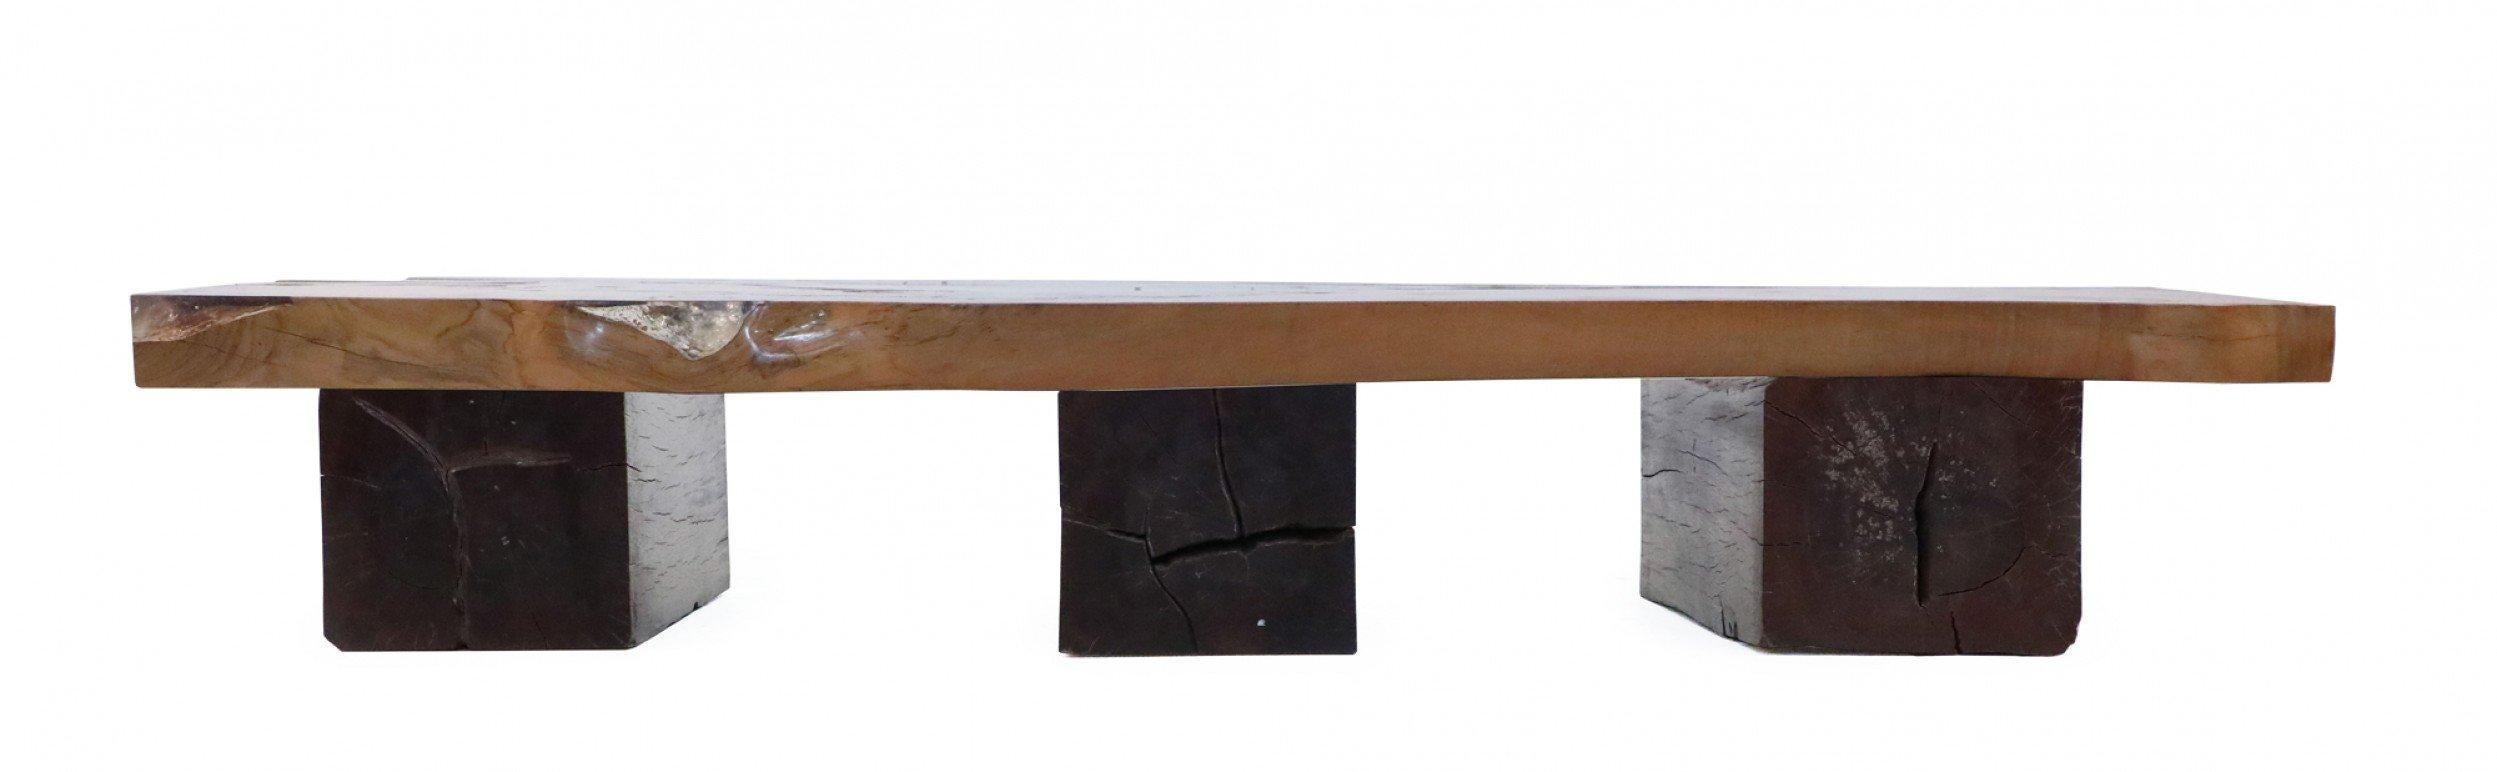 Contemporary live edge oak slab coffee table with poured amethyst resin in knot holes. Slab rests on three solid wood rectangular legs.